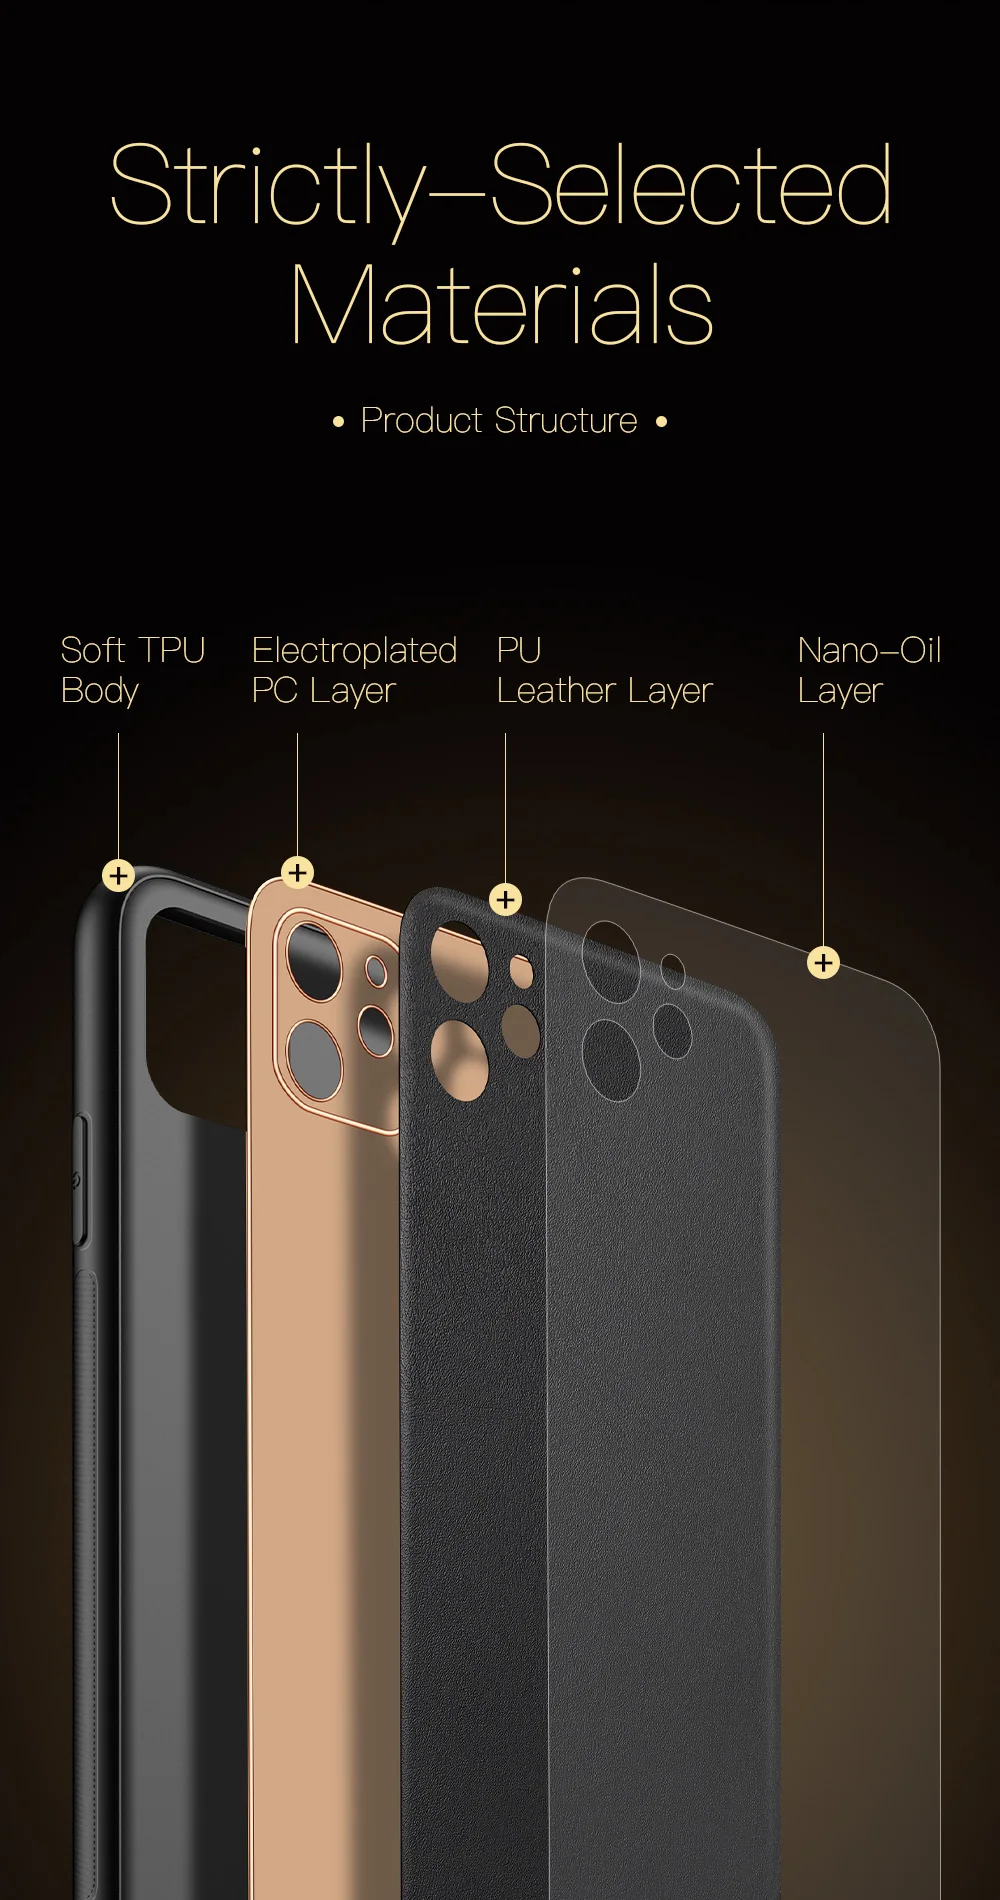 rhinoshield case Luxury PU Leather Case For iPhone 12 Pro Max Case Business Cover For iPhone 11 Pro Max SE 2020 7 8 Plating Shockproof Back Cases mous phone case